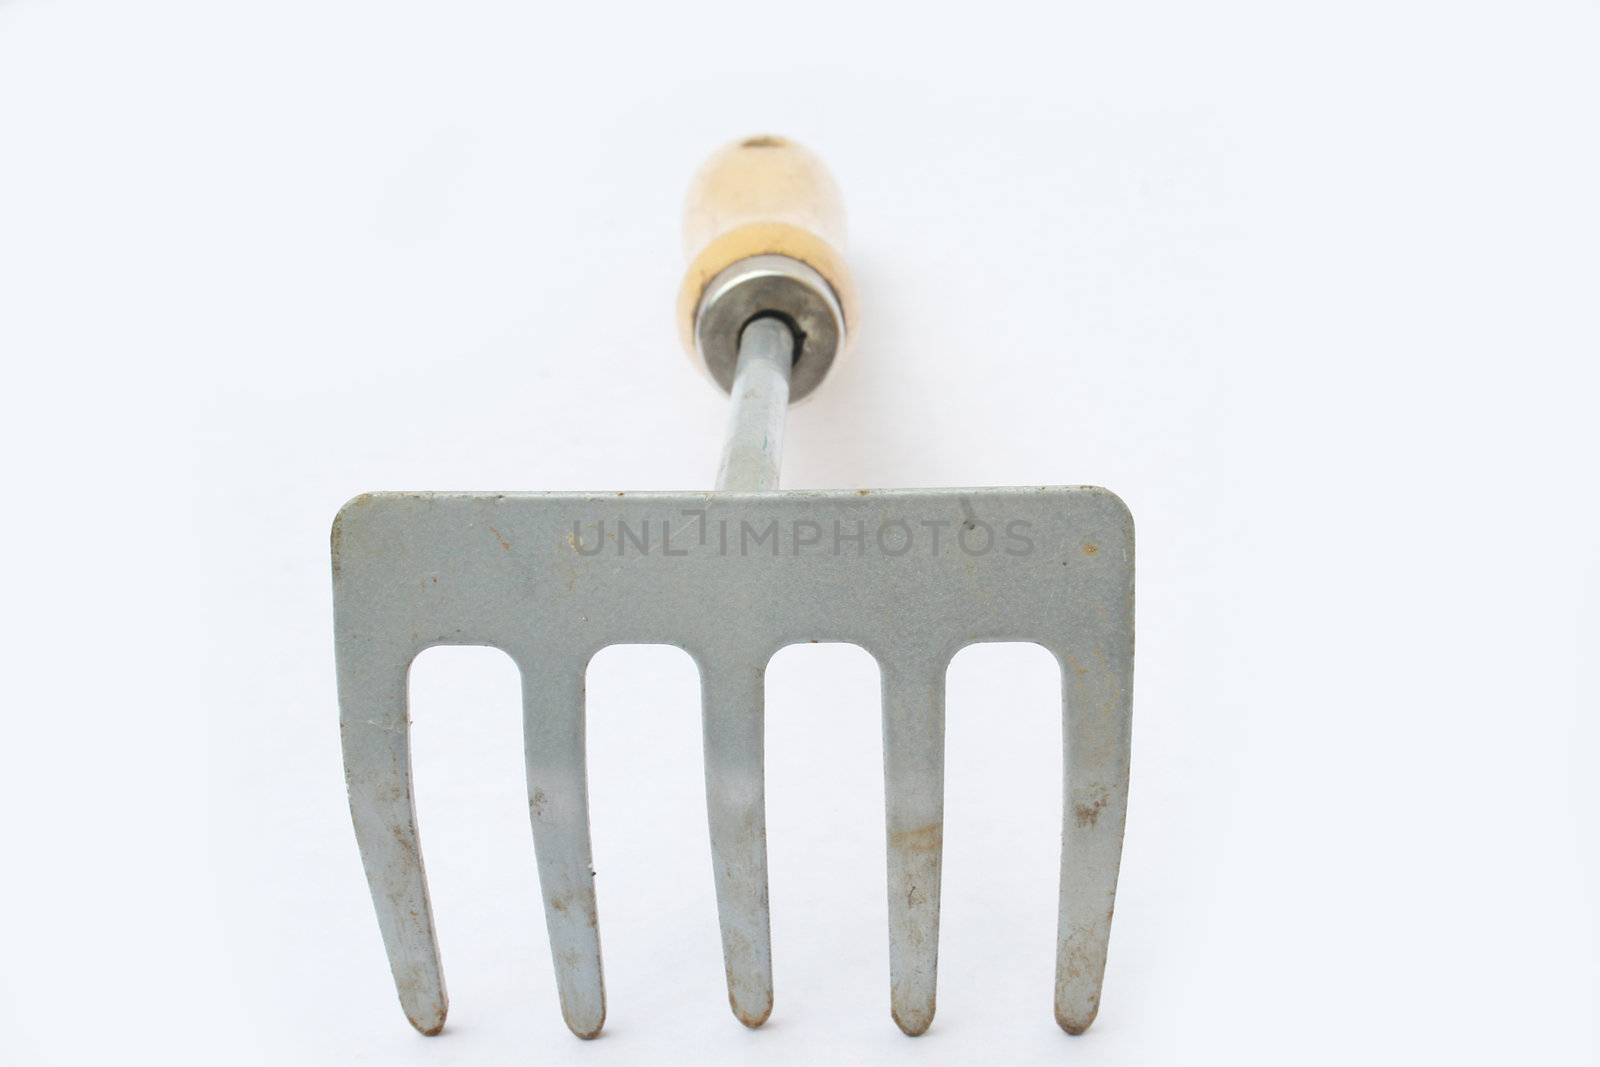 Hand rake from front with shallow depth-of-field against white background